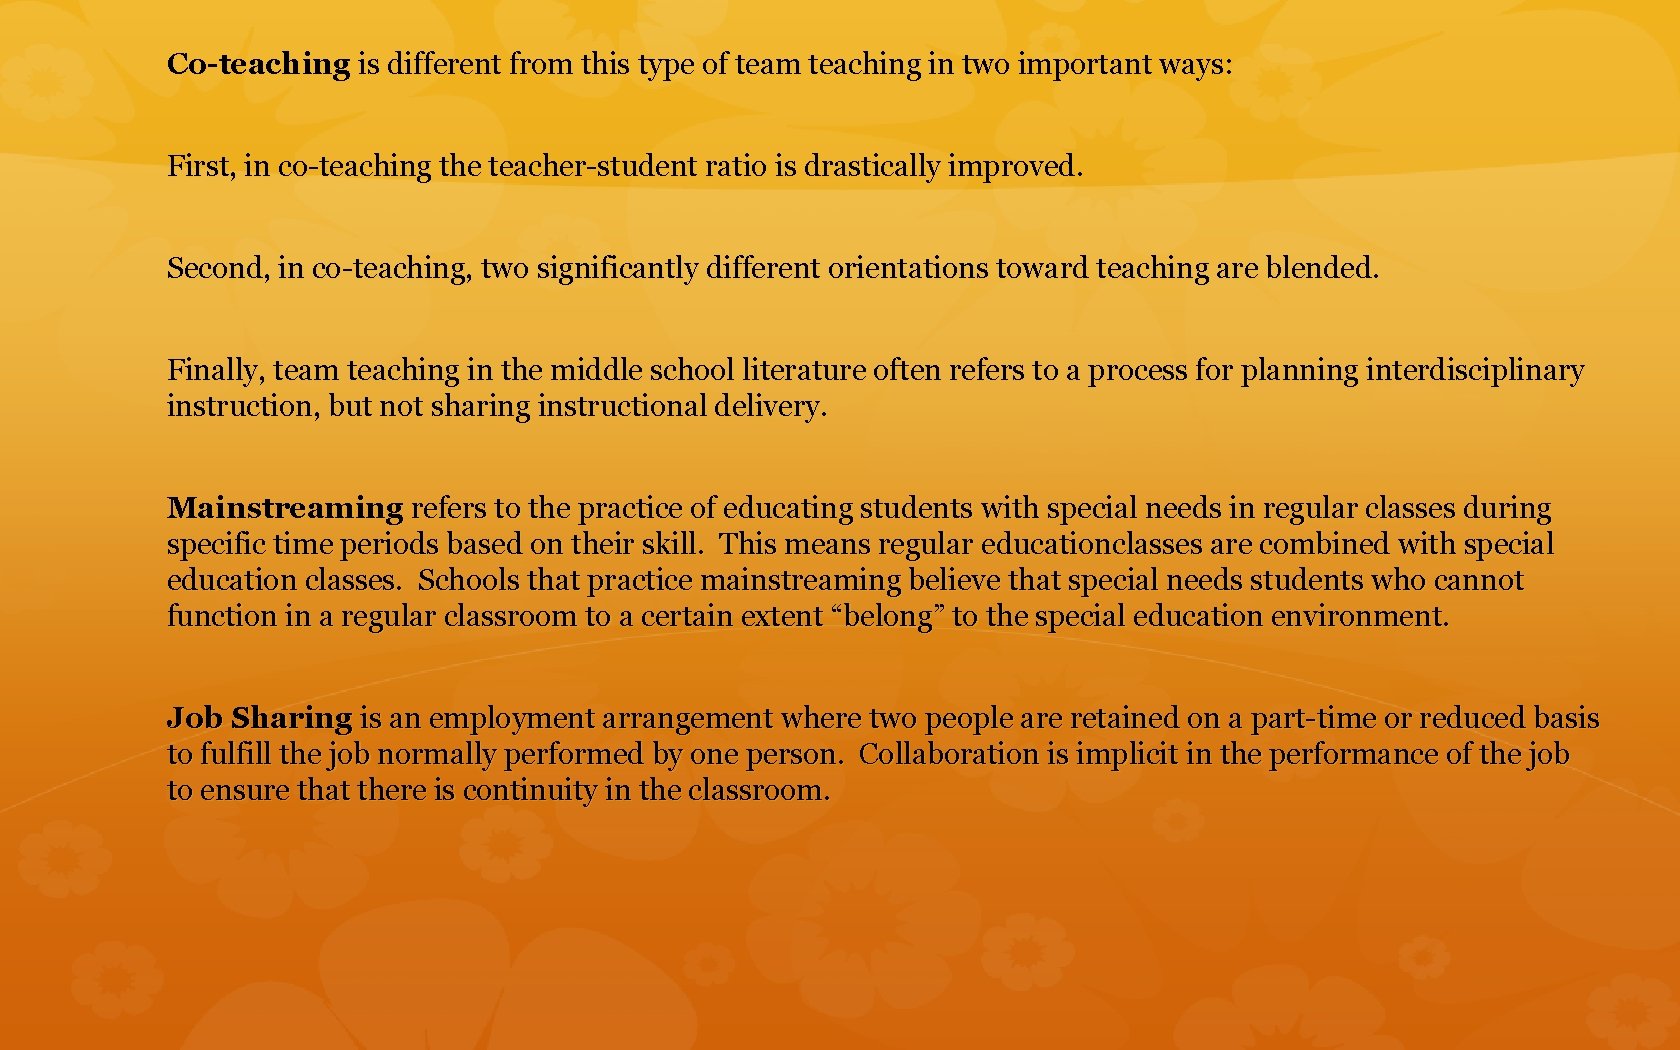 Co-teaching is different from this type of team teaching in two important ways: First,